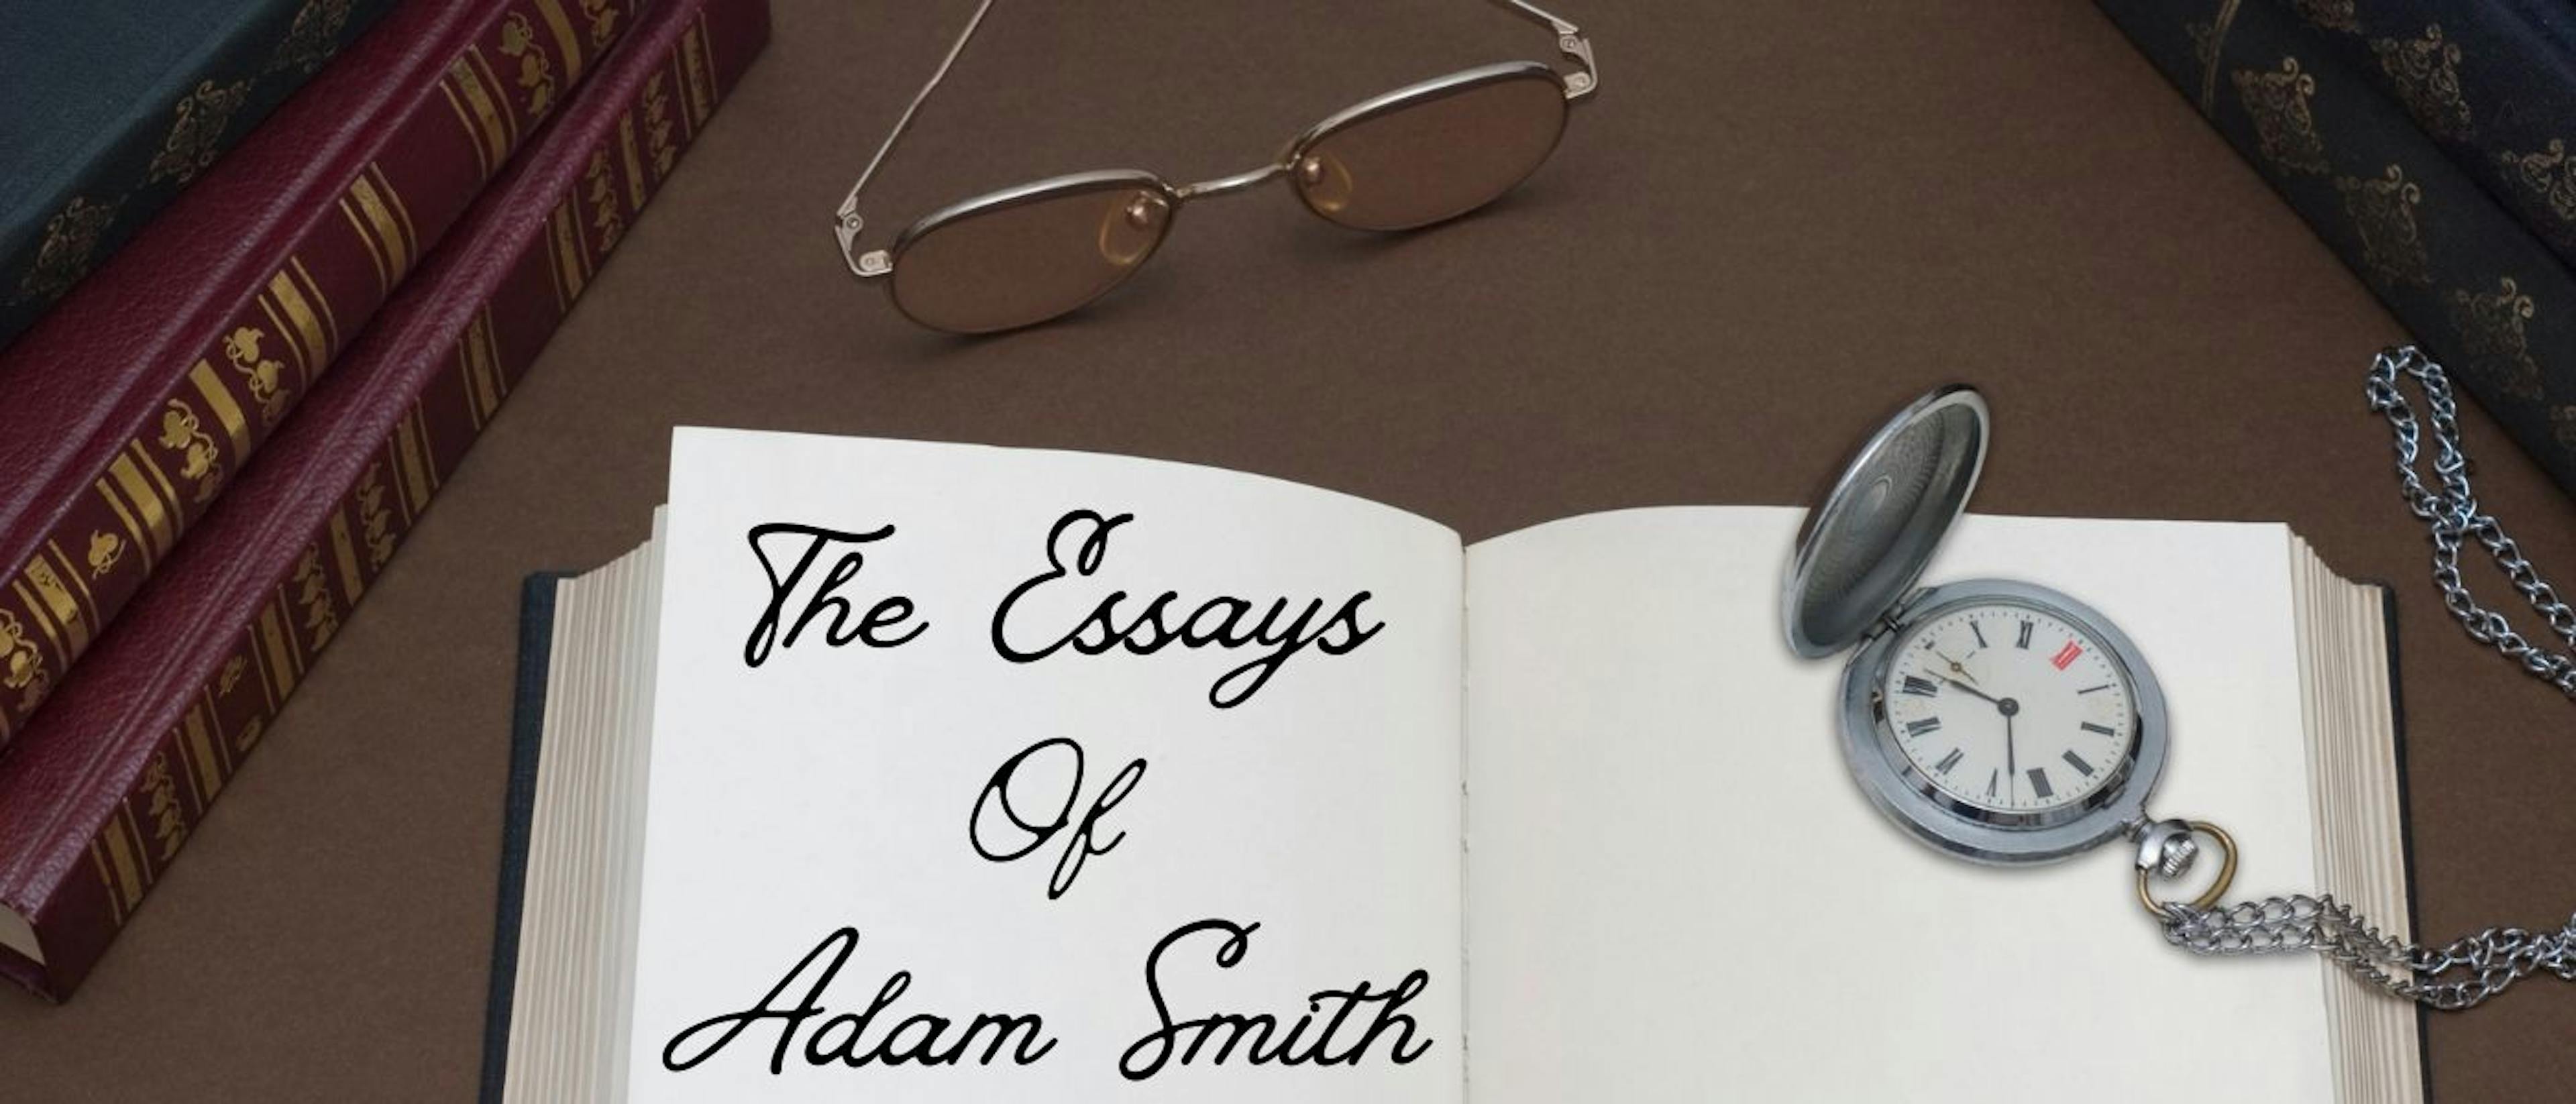 featured image - The Essays of Adam Smith: Part II, SEC. I, Chapter III